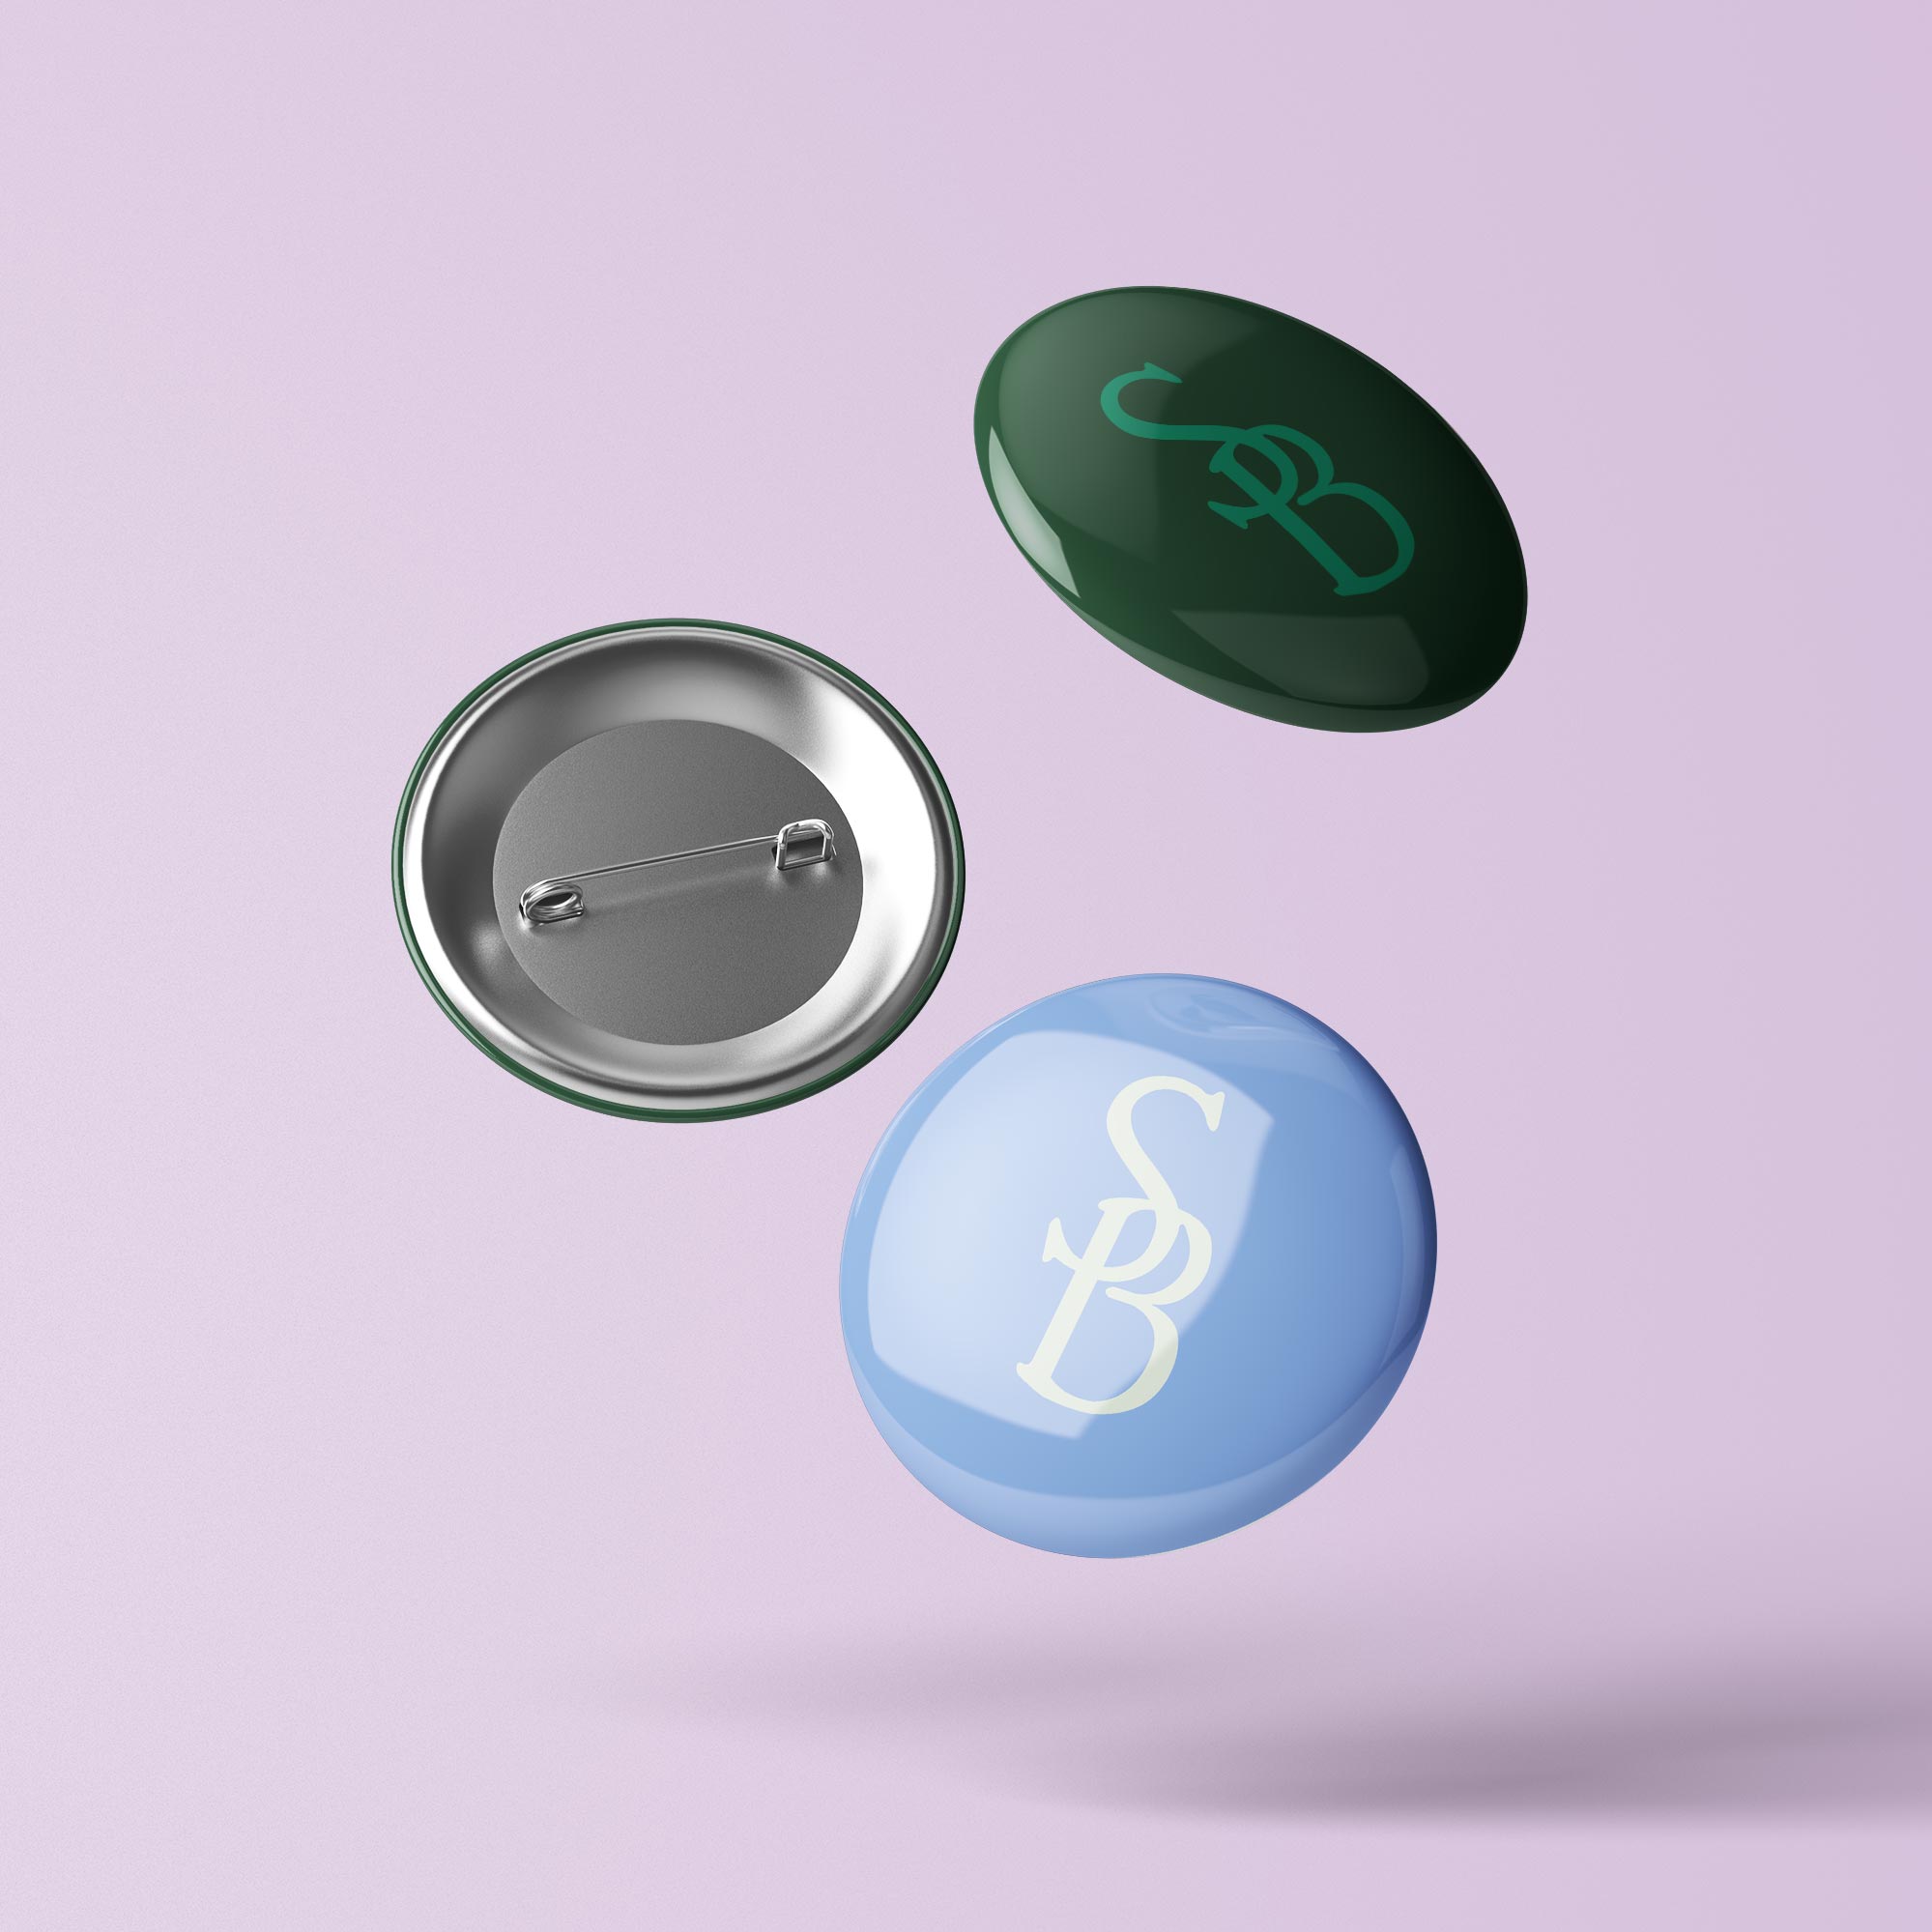 Branded buttons with monogram logos printed.